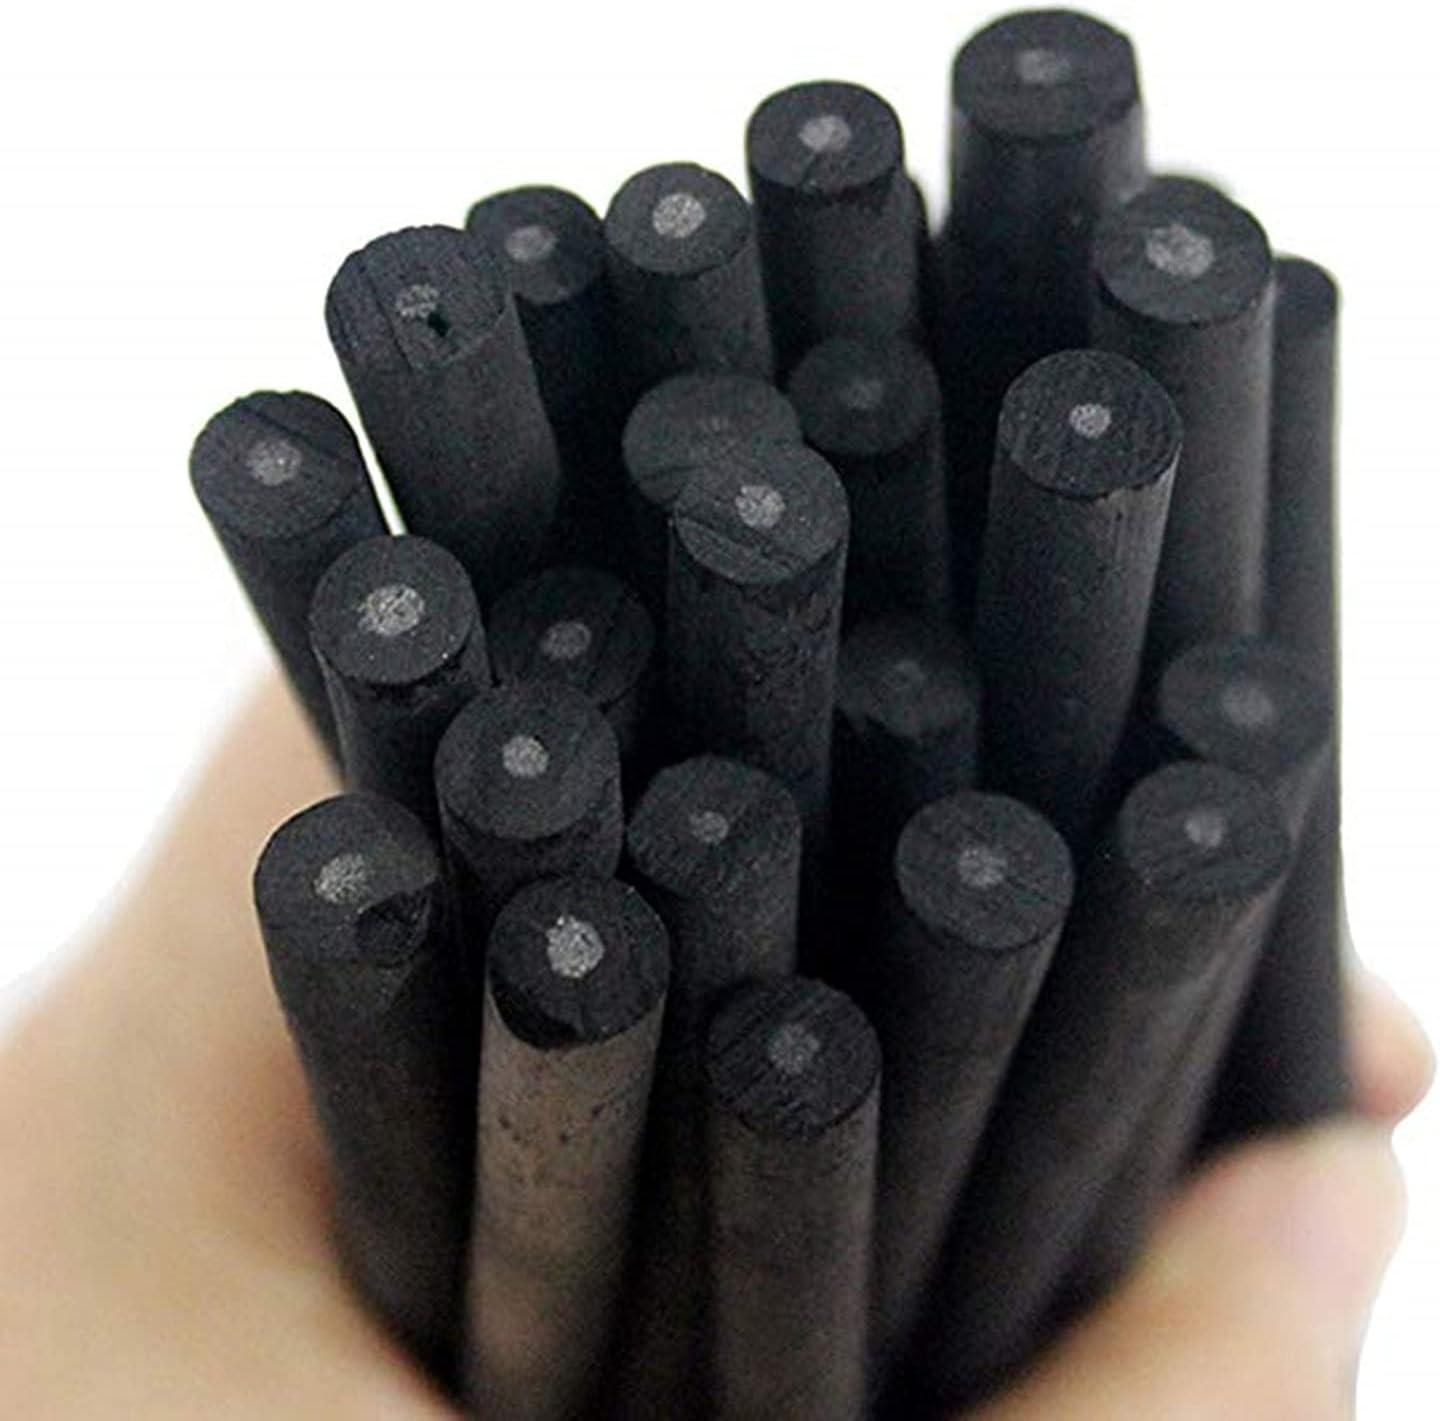 XHBTS 50 Pcs Willow Charcoal Soft Black Charcoal Sticks for Drawing  Sketching and Fine Art Willow Sketch Charcoal Pencils for Drawing -2 Box  3-5mm 5-8mm